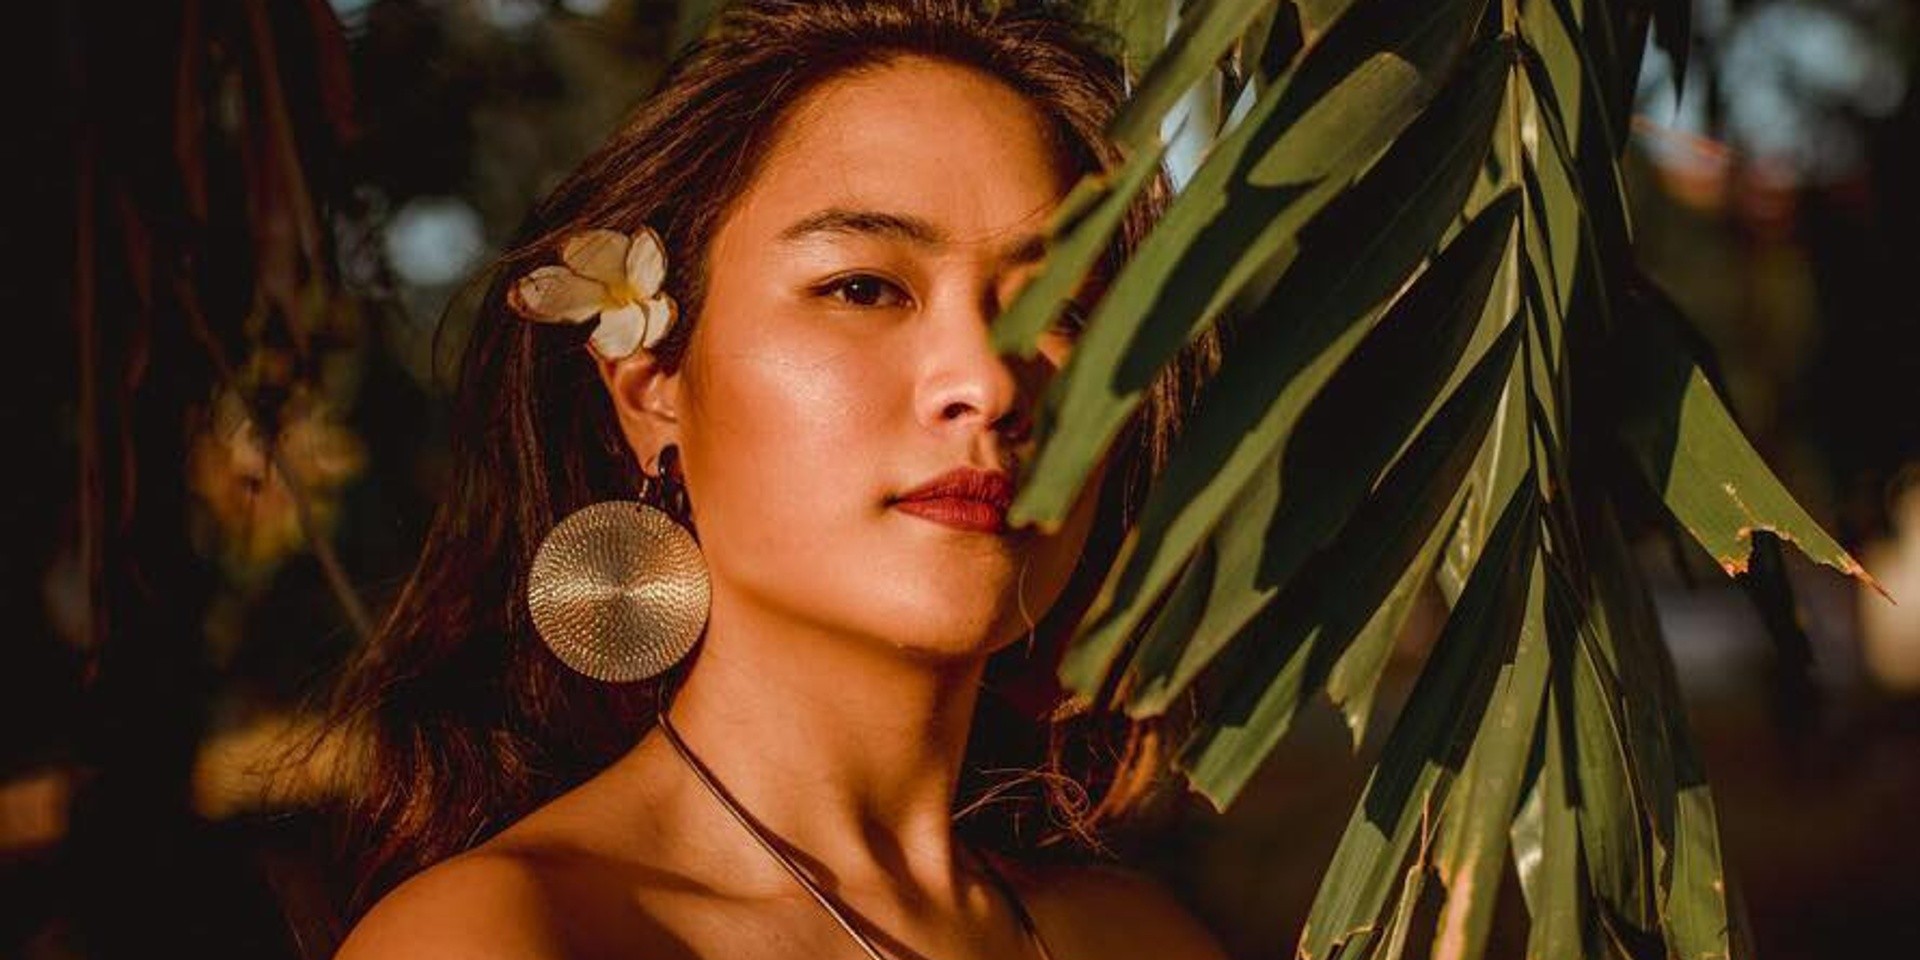 Rice Lucido to kick off Hele ng Maharlika tour with intimate invite-only show